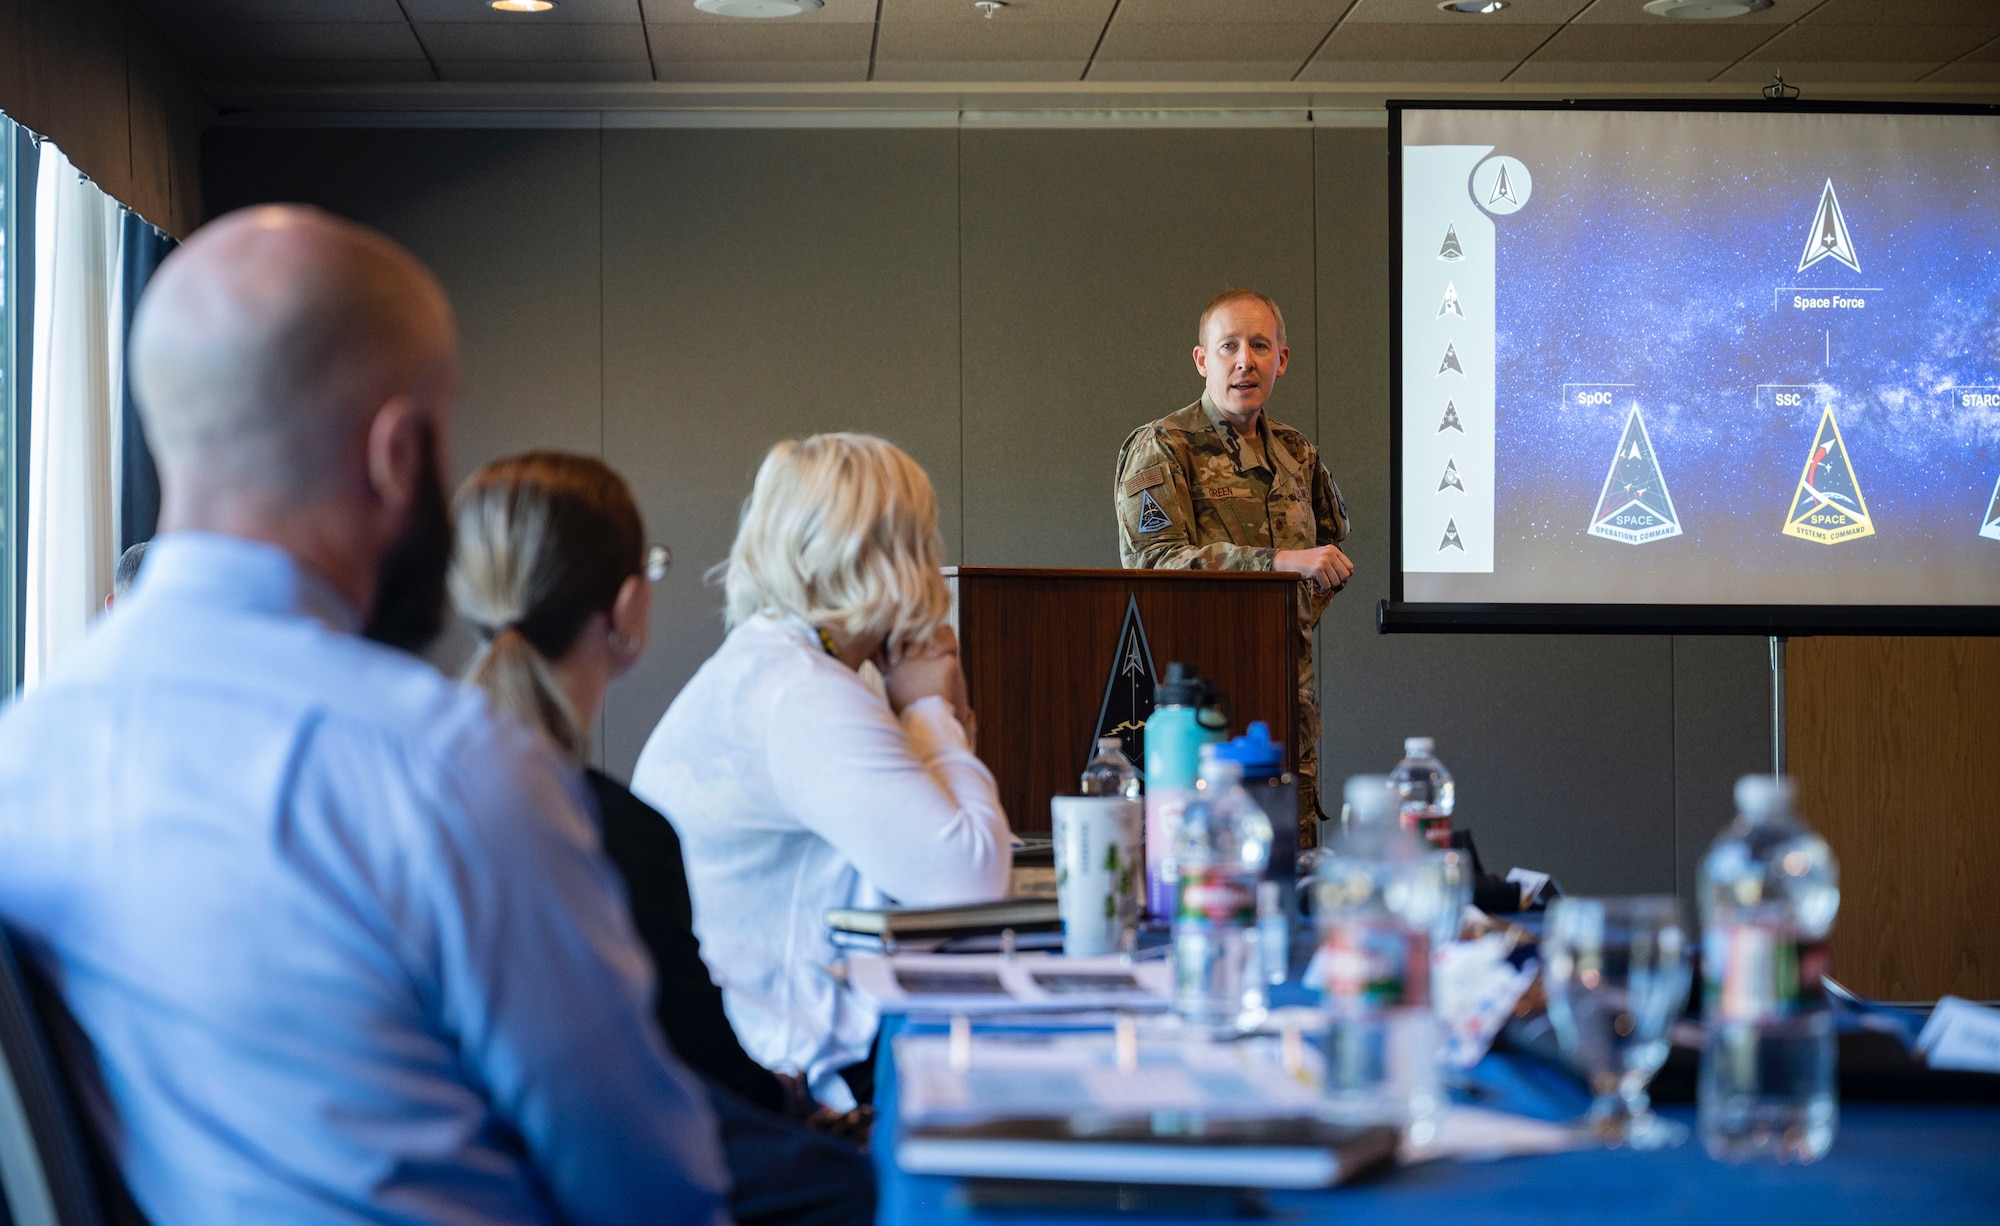 Space Training and Readiness Command spouses receive a mission brief during a conference at the U.S. Air Force Academy,